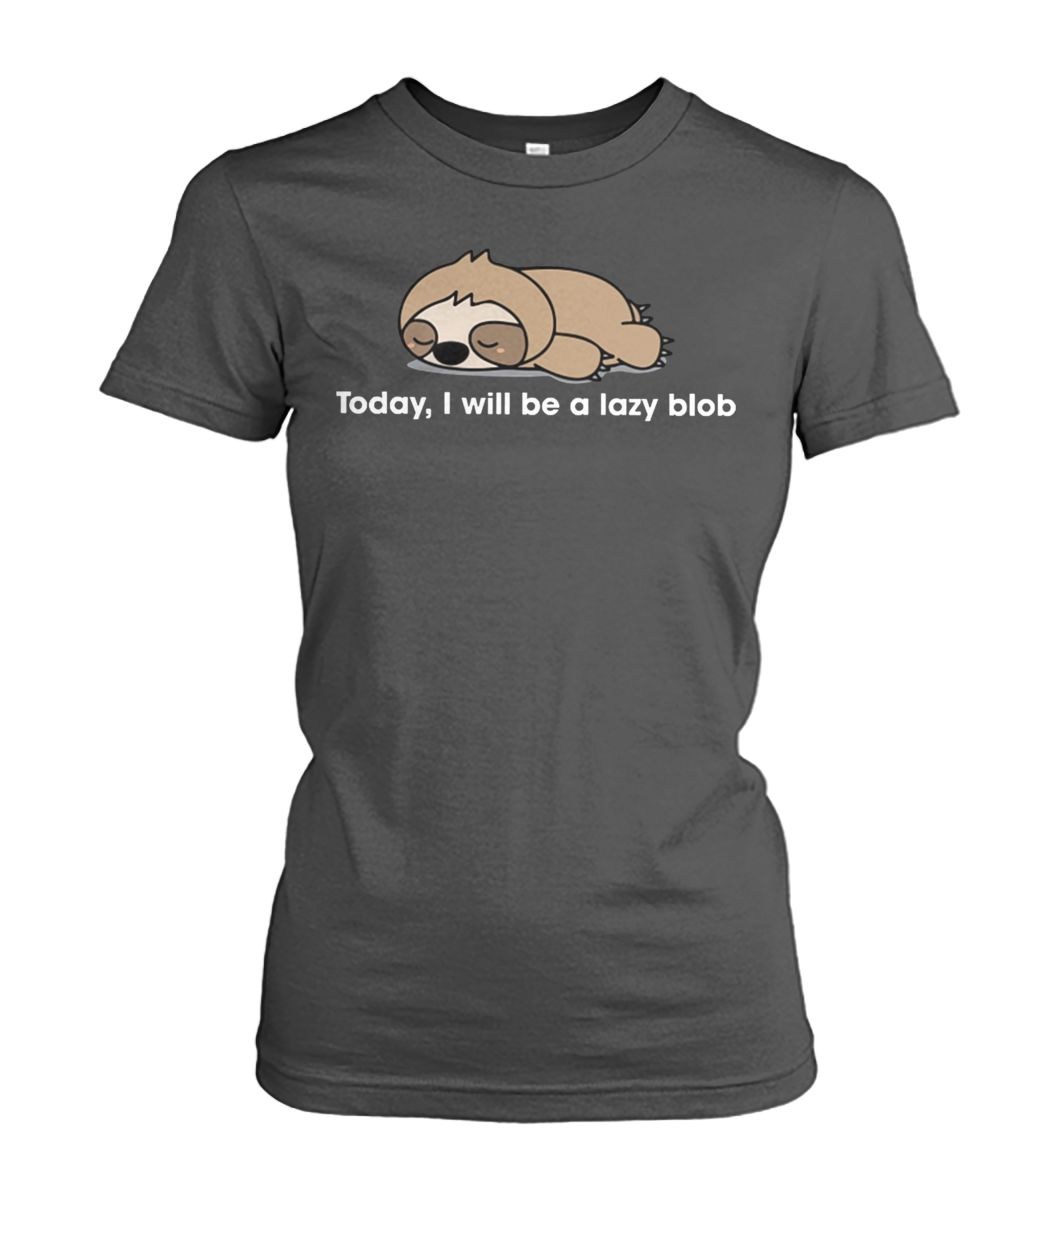 Sloth to day I will be a lady blob women's crew tee